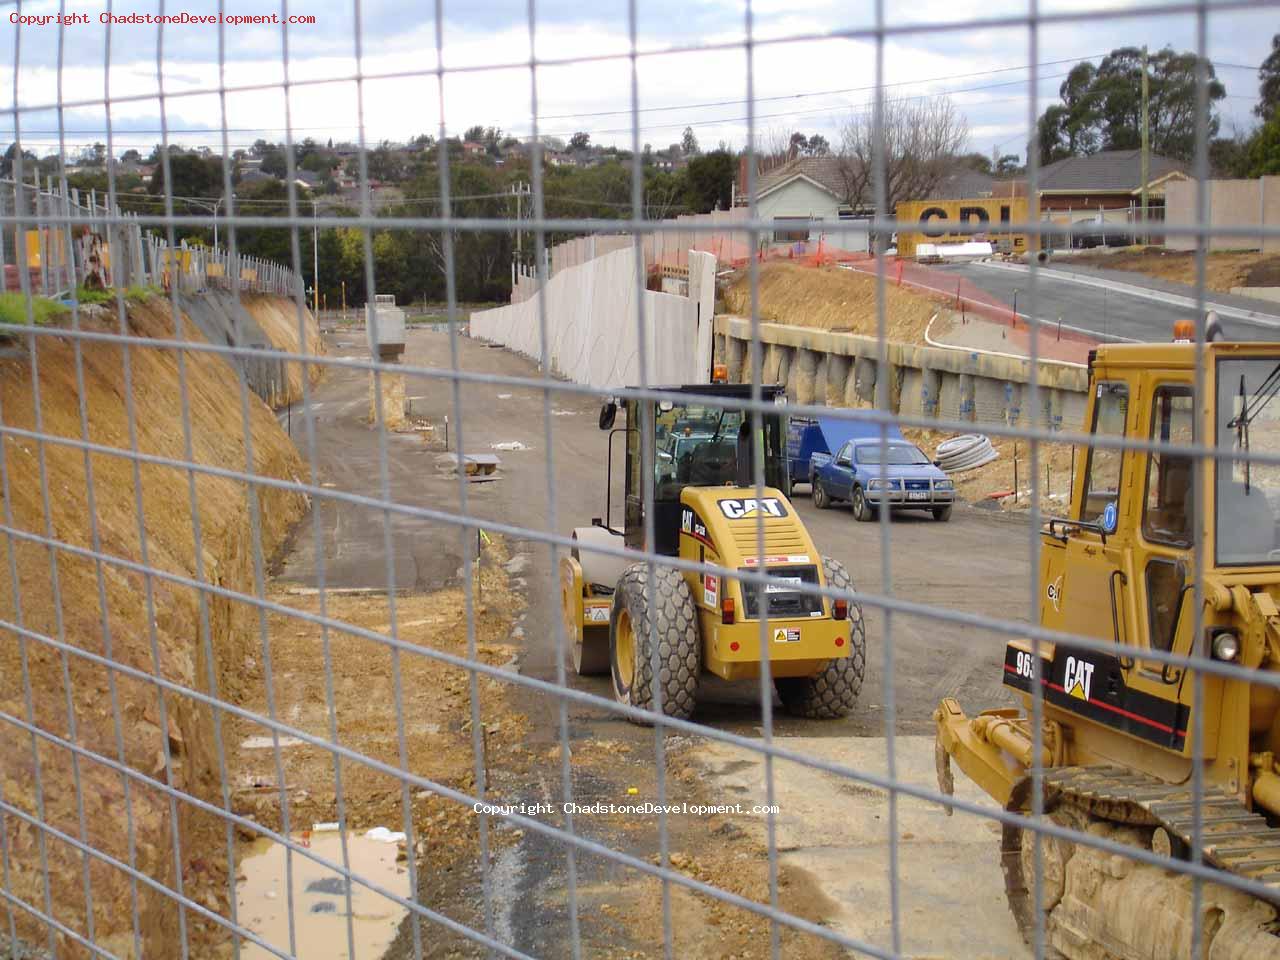 The underpass, closer view - Chadstone Development Discussions